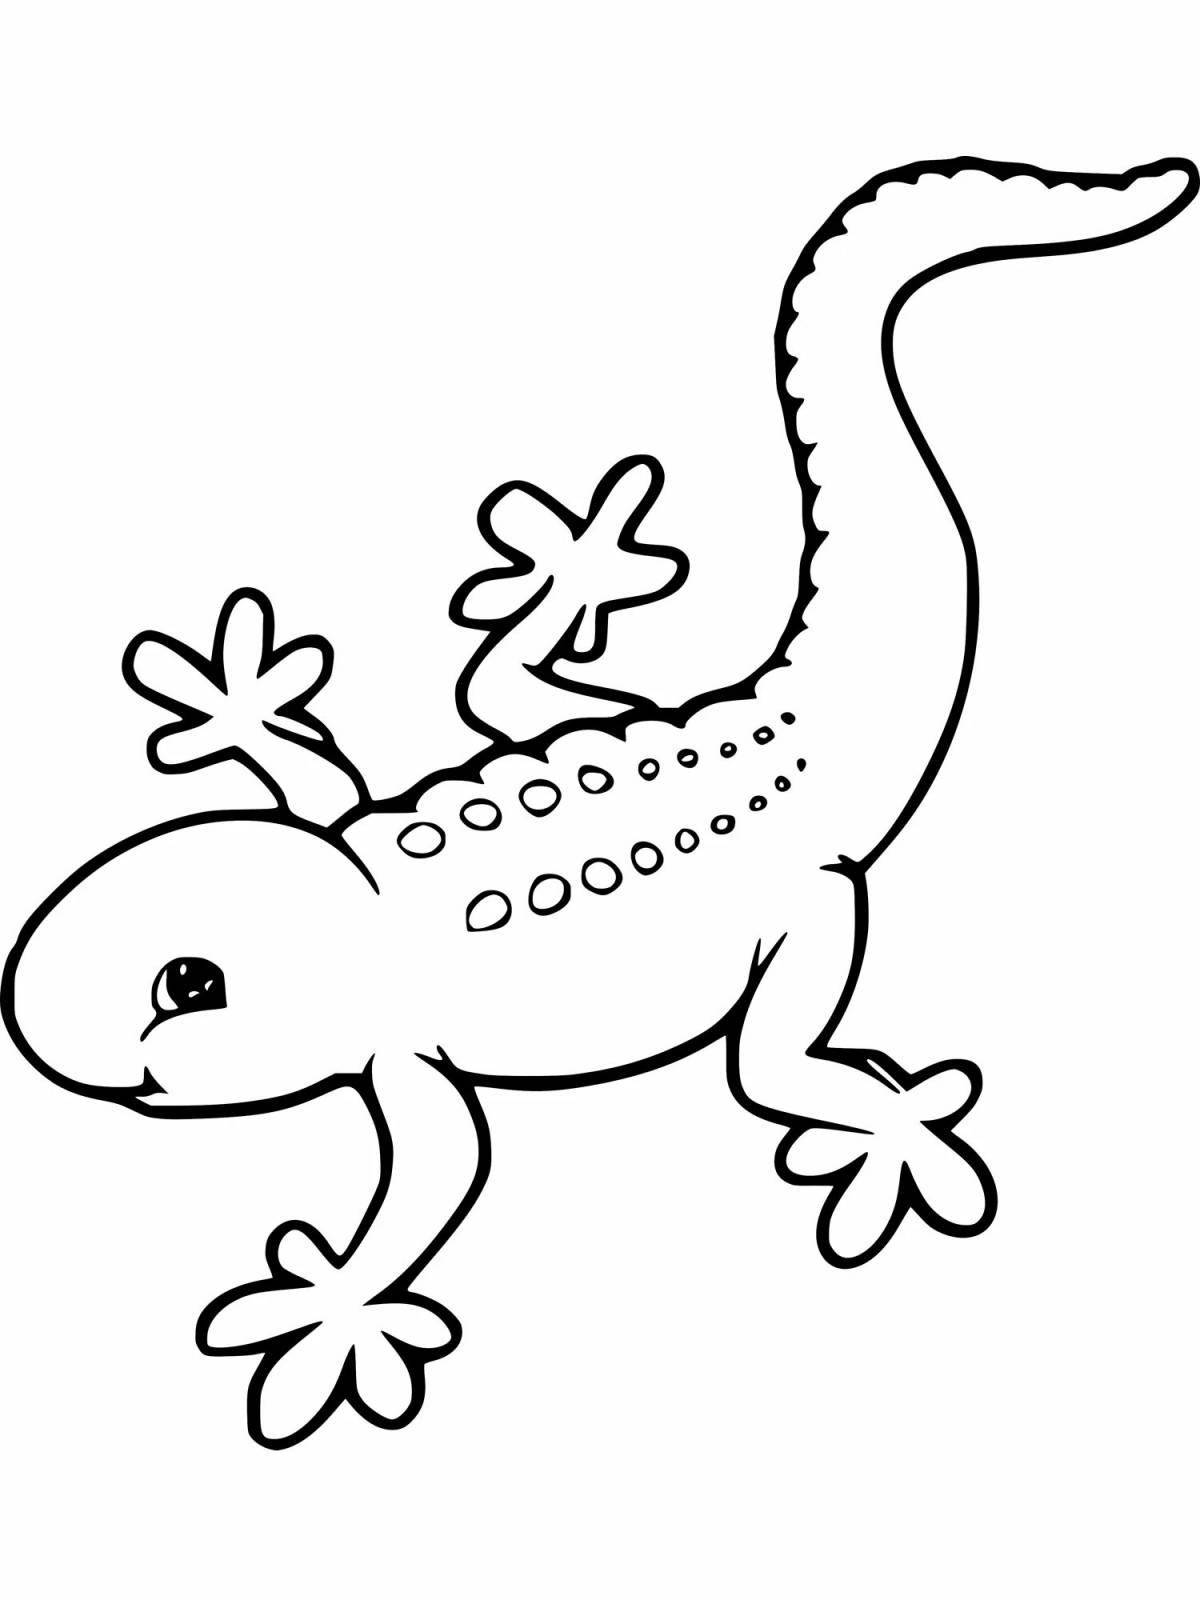 Gecko Live Coloring